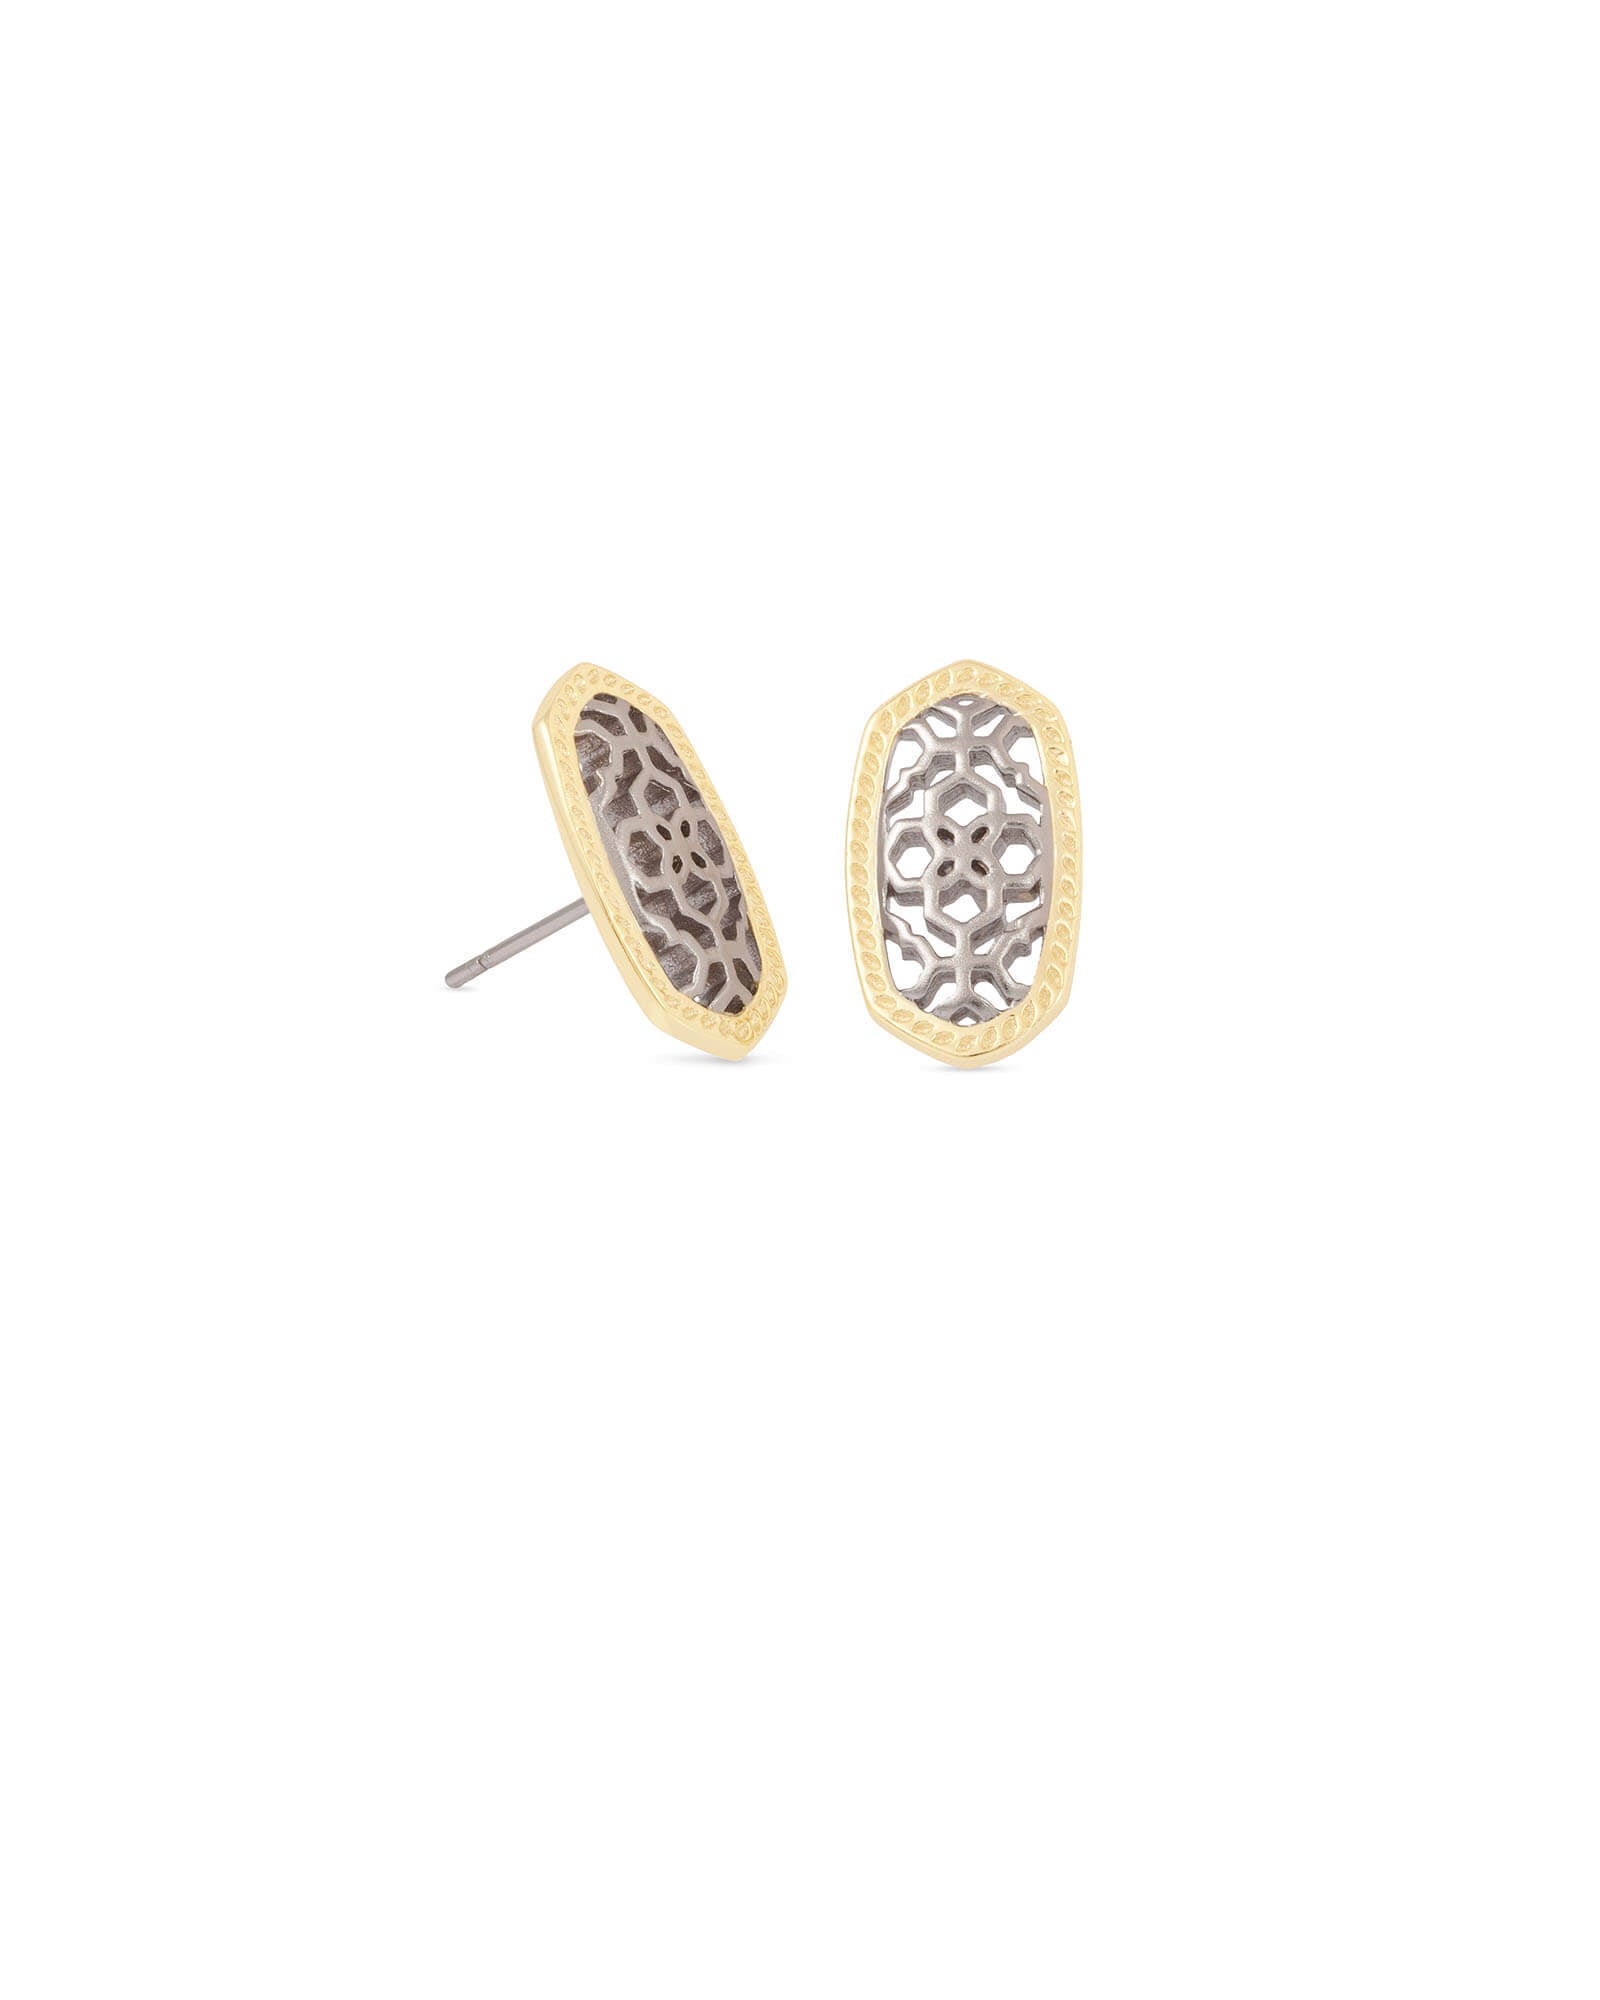 Ellie Gold - Rhodium Mix Earring Front View